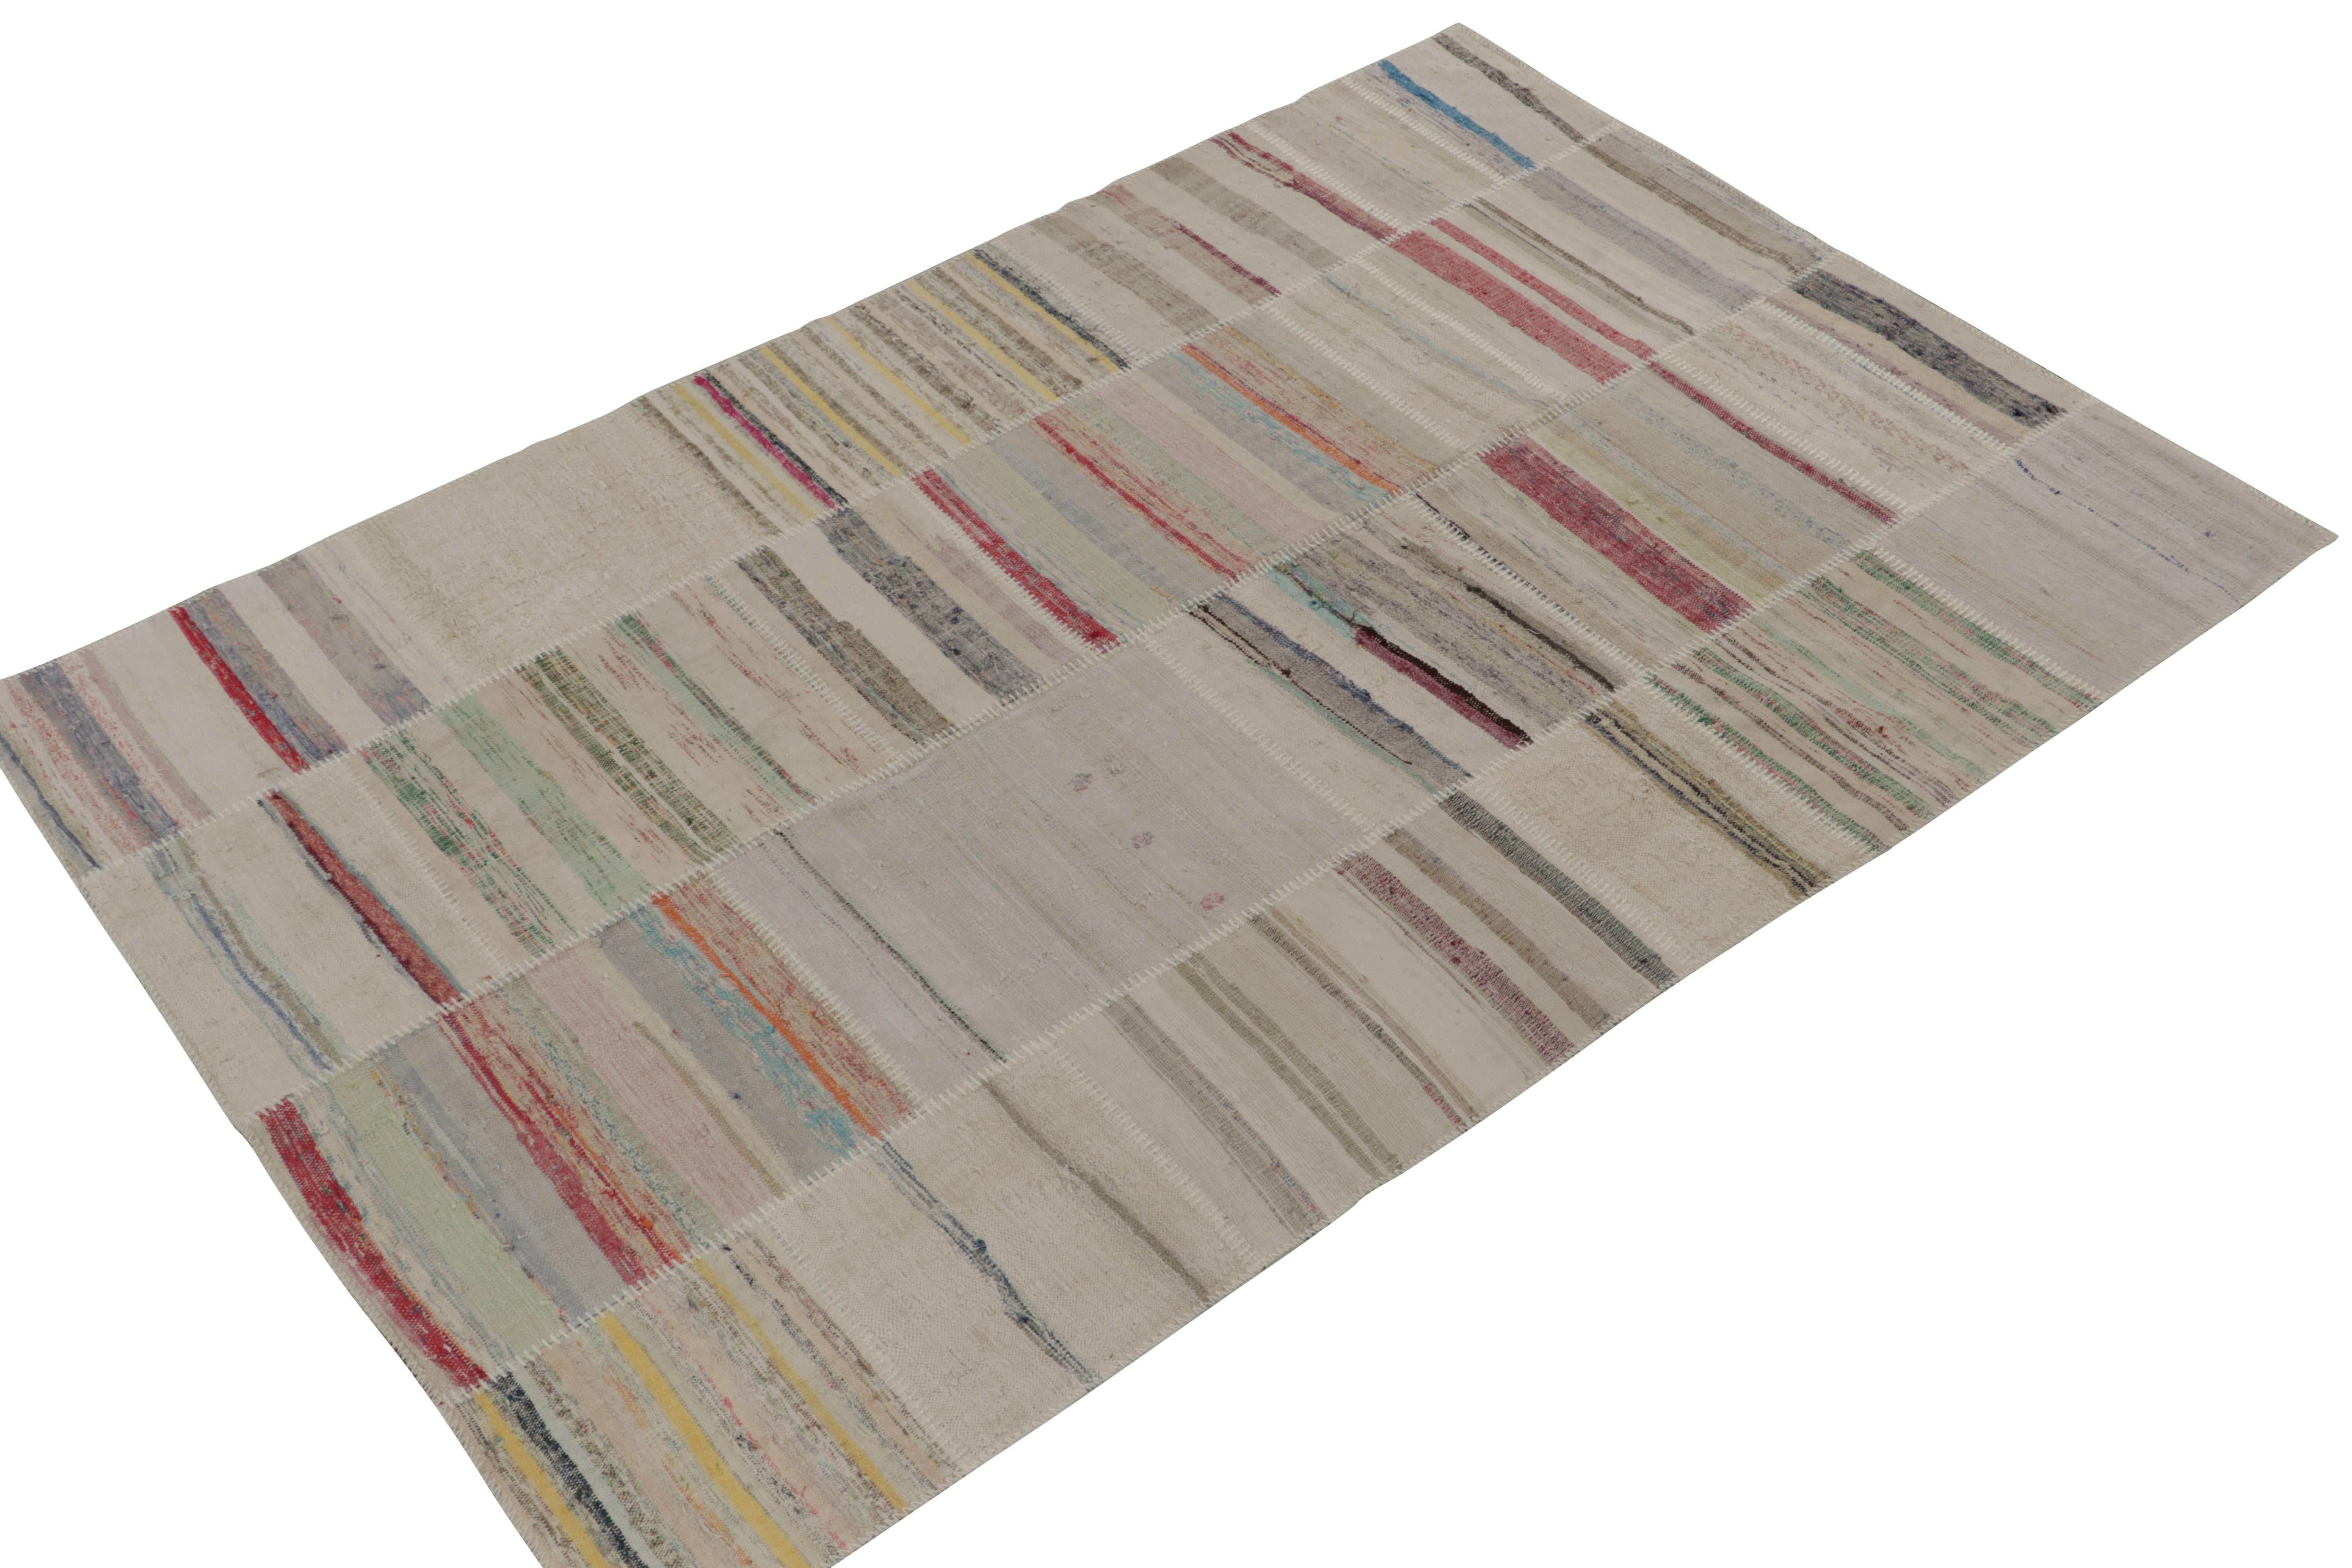 Handwoven in wool, Rug & Kilim presents a 6x9 contemporary rug from their innovative new patchwork kilim collection. 

On the Design: 

This flat weave technique repurposes vintage yarns in polychromatic stripes and striae, achieving a playful look